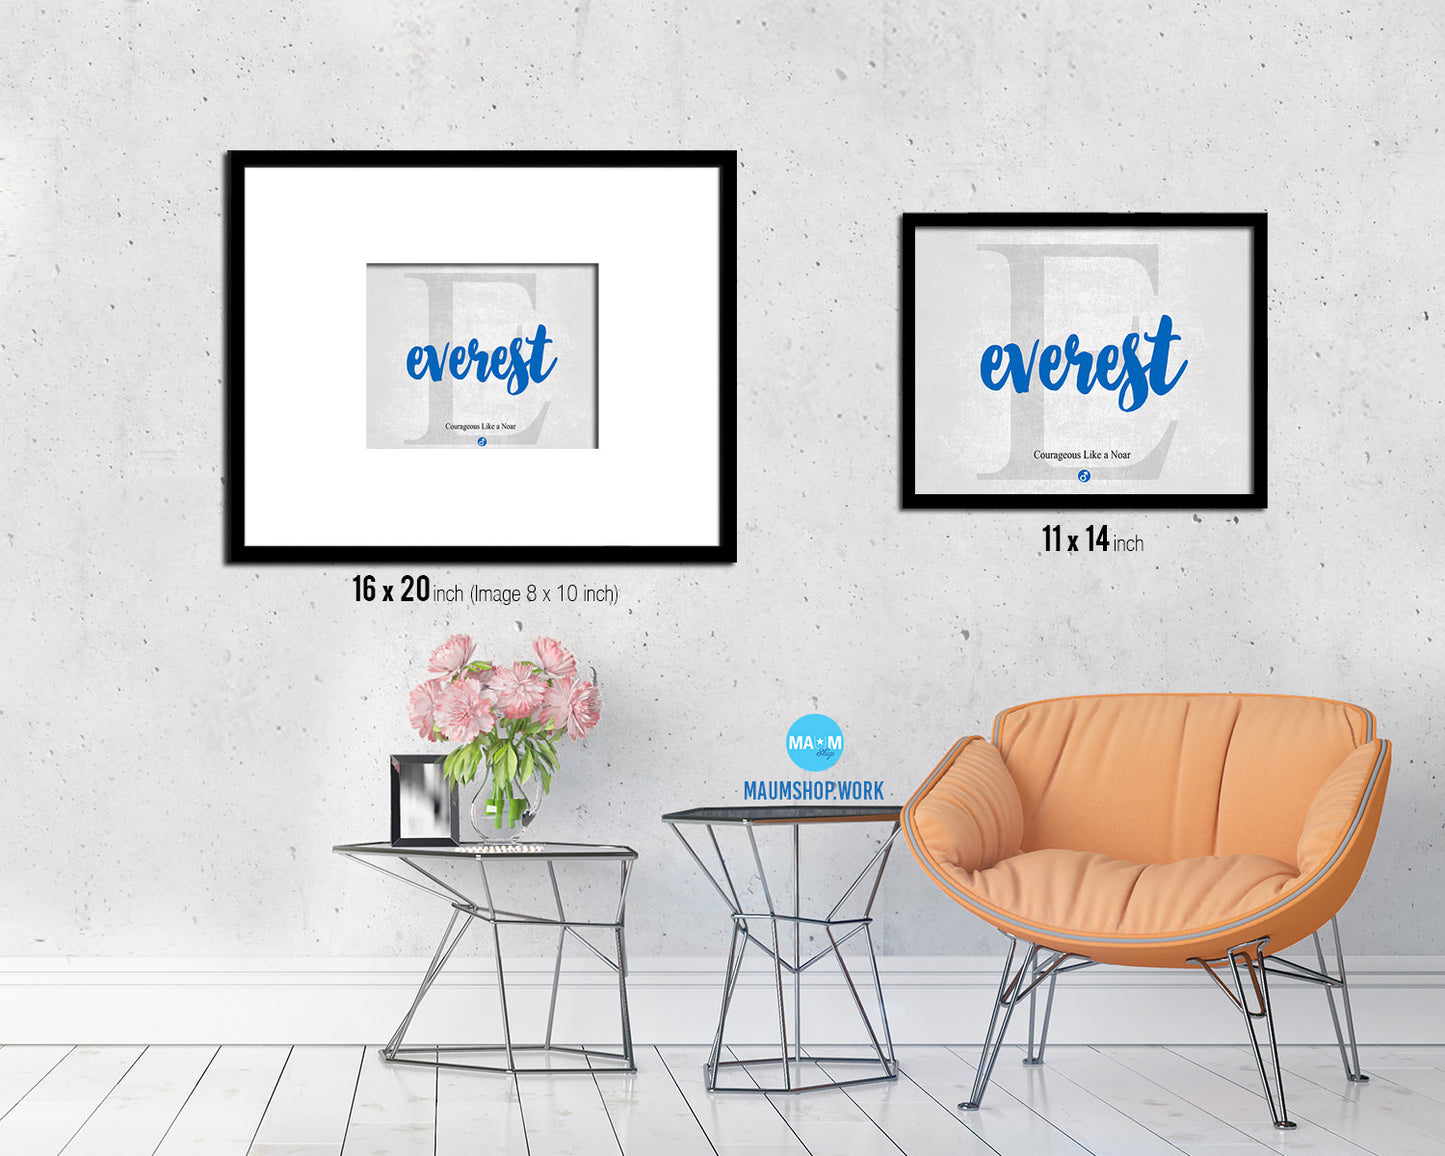 Everest Personalized Biblical Name Plate Art Framed Print Kids Baby Room Wall Decor Gifts